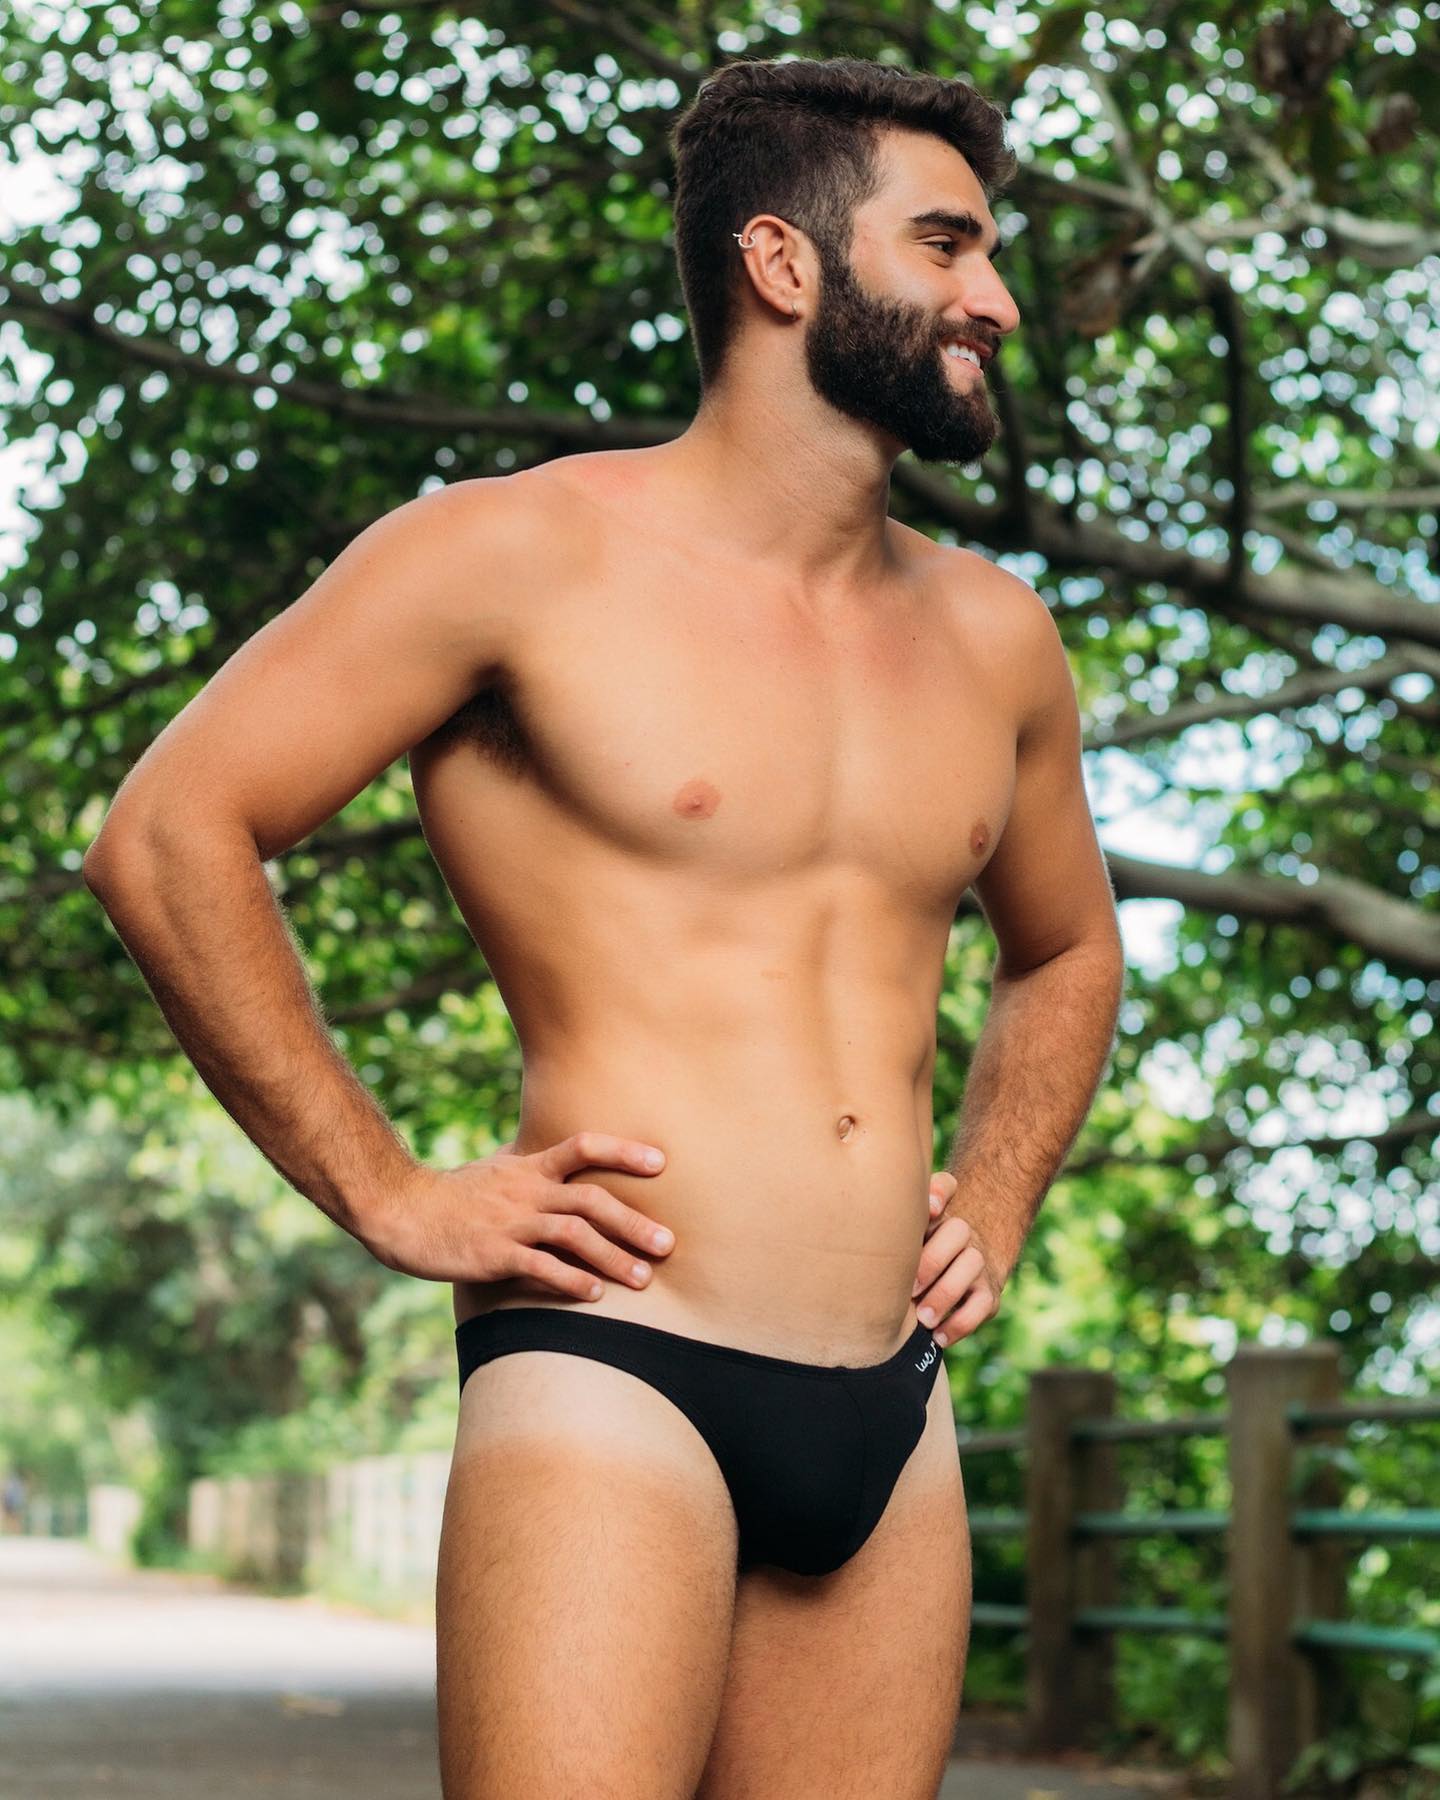 Super low-rise and available in four must-have colours. Check out the new Micro Briefs by Walking Jack:
_____
menandunderwear.com/shop